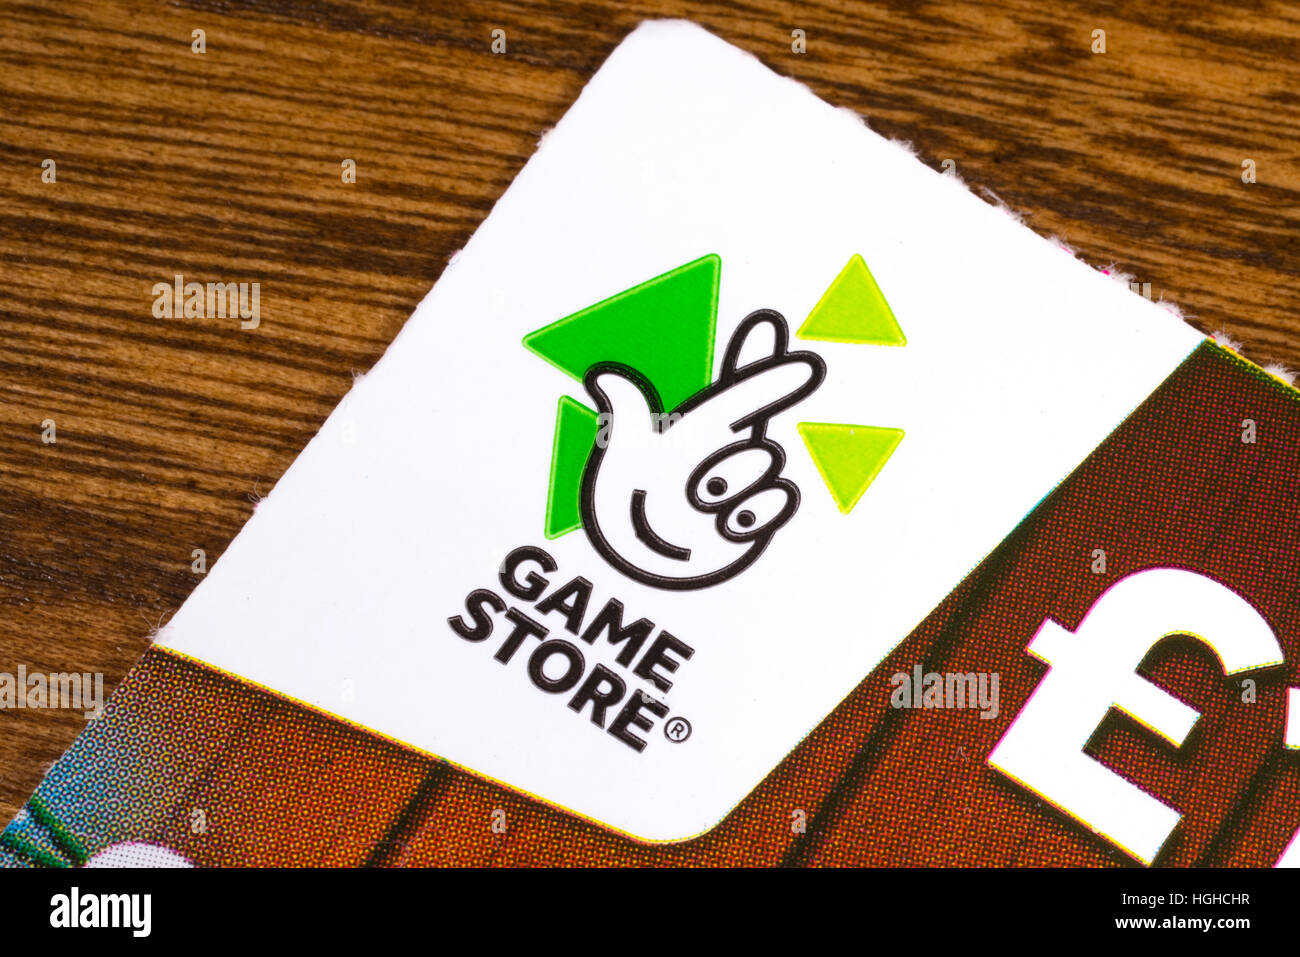 Game Store Logo Stock Photos and Pictures - 16,737 Images